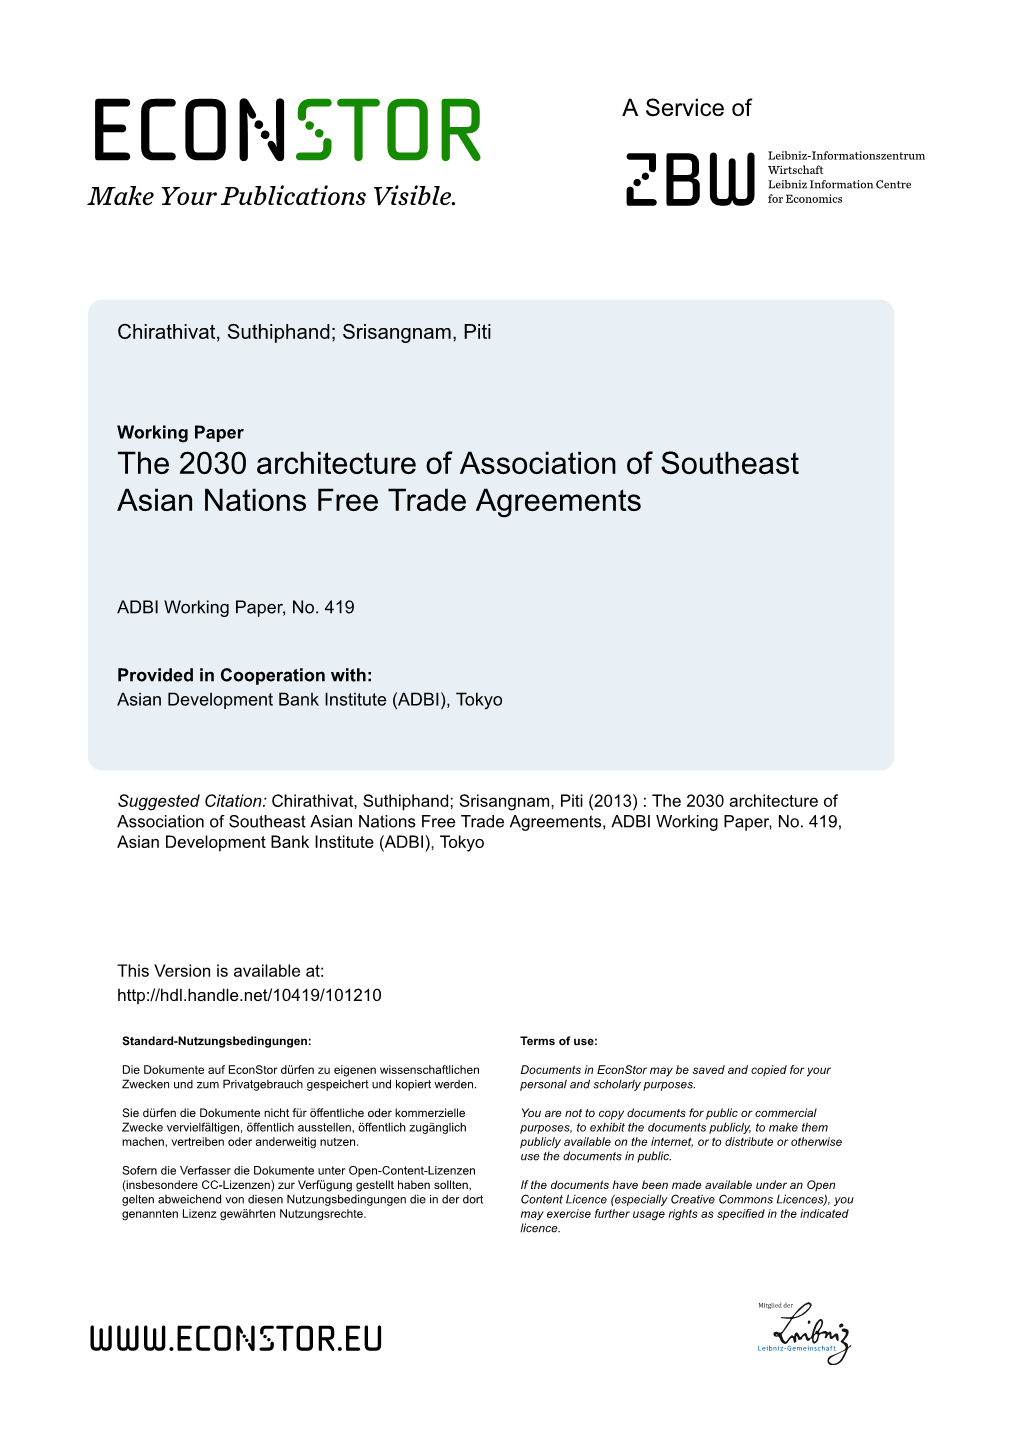 The 2030 Architecture of Association of Southeast Asian Nations Free Trade Agreements